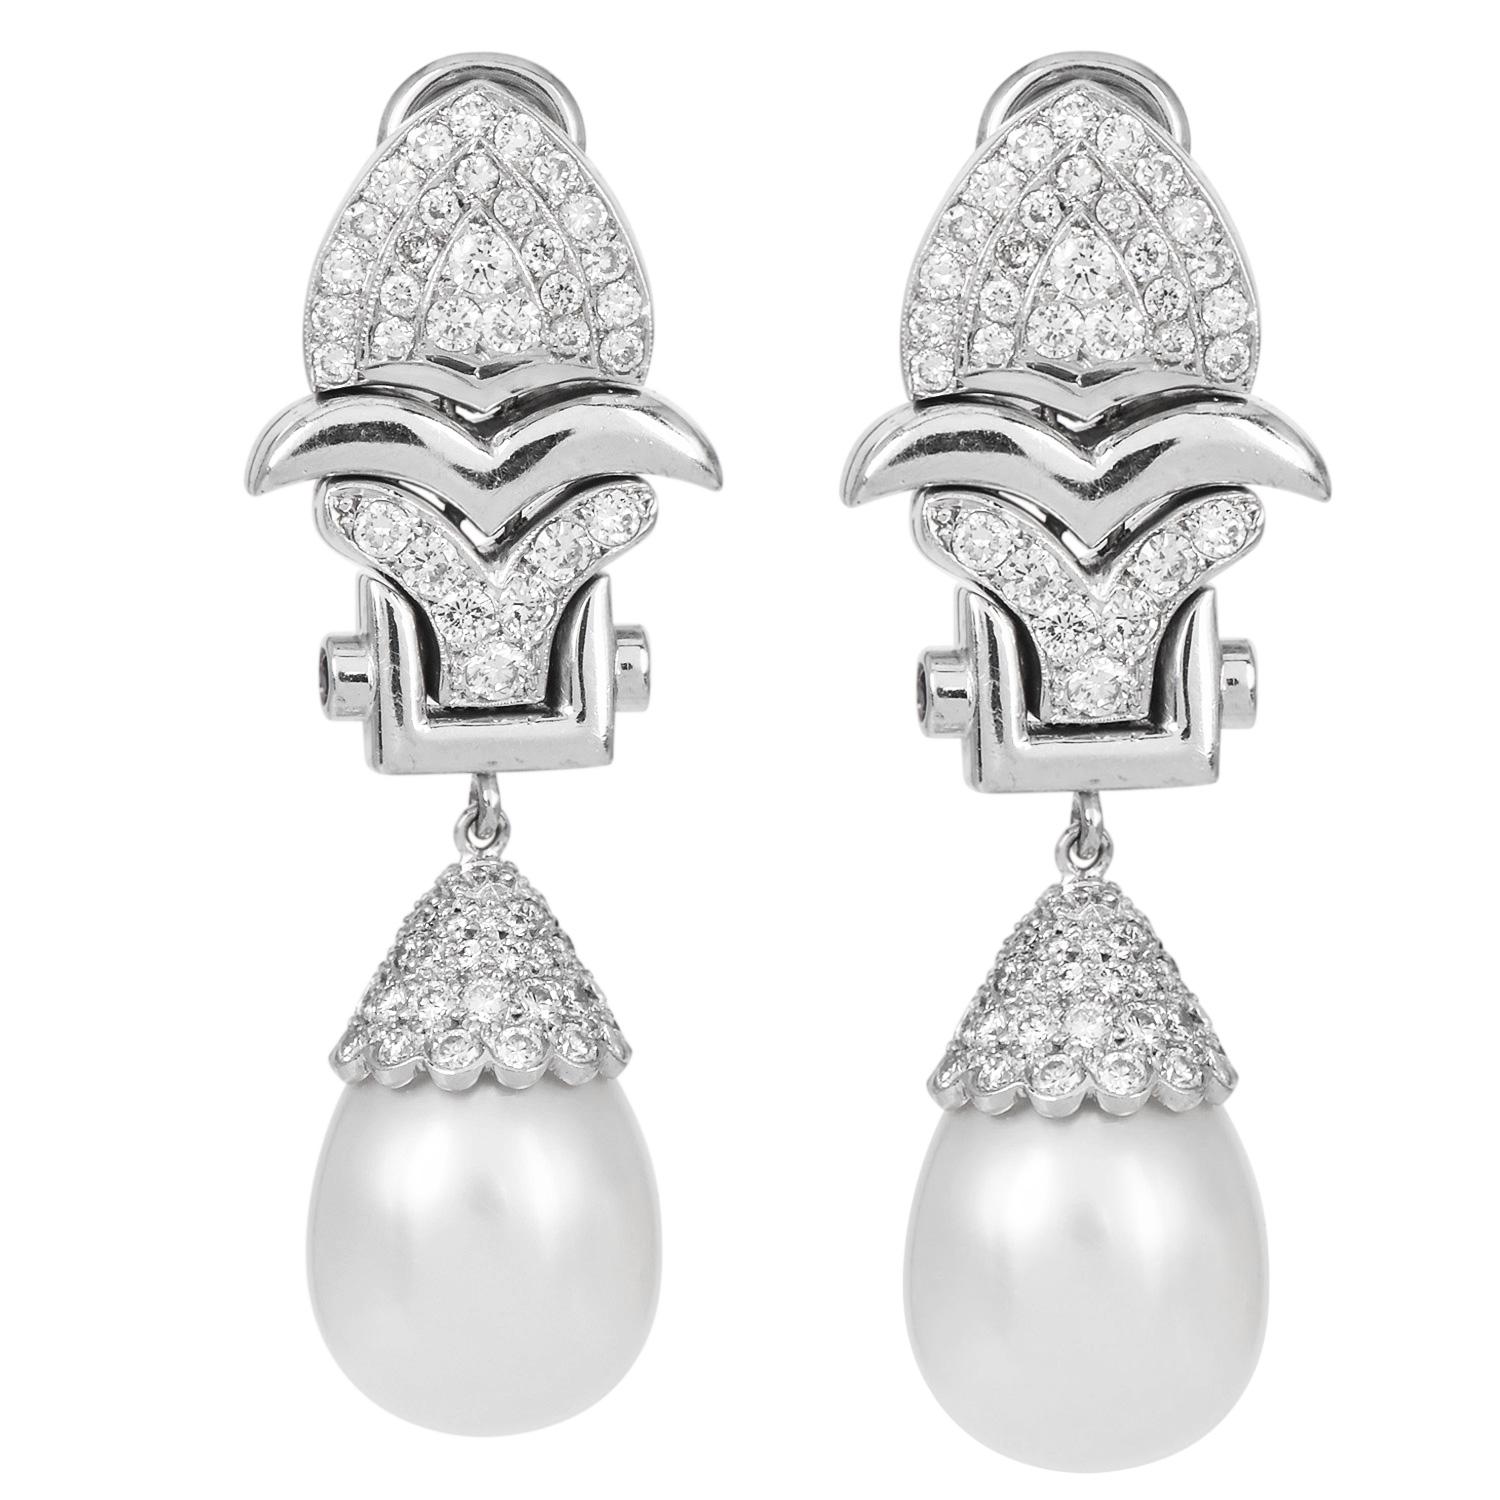 These platinum dangle earrings feature a lustrous South Sea pearl suspended from a scalloped design setting.

Each earring showcases a cascade of 168 natural round diamonds, meticulously set to enhance their radiance, with a combined weight of 3.38